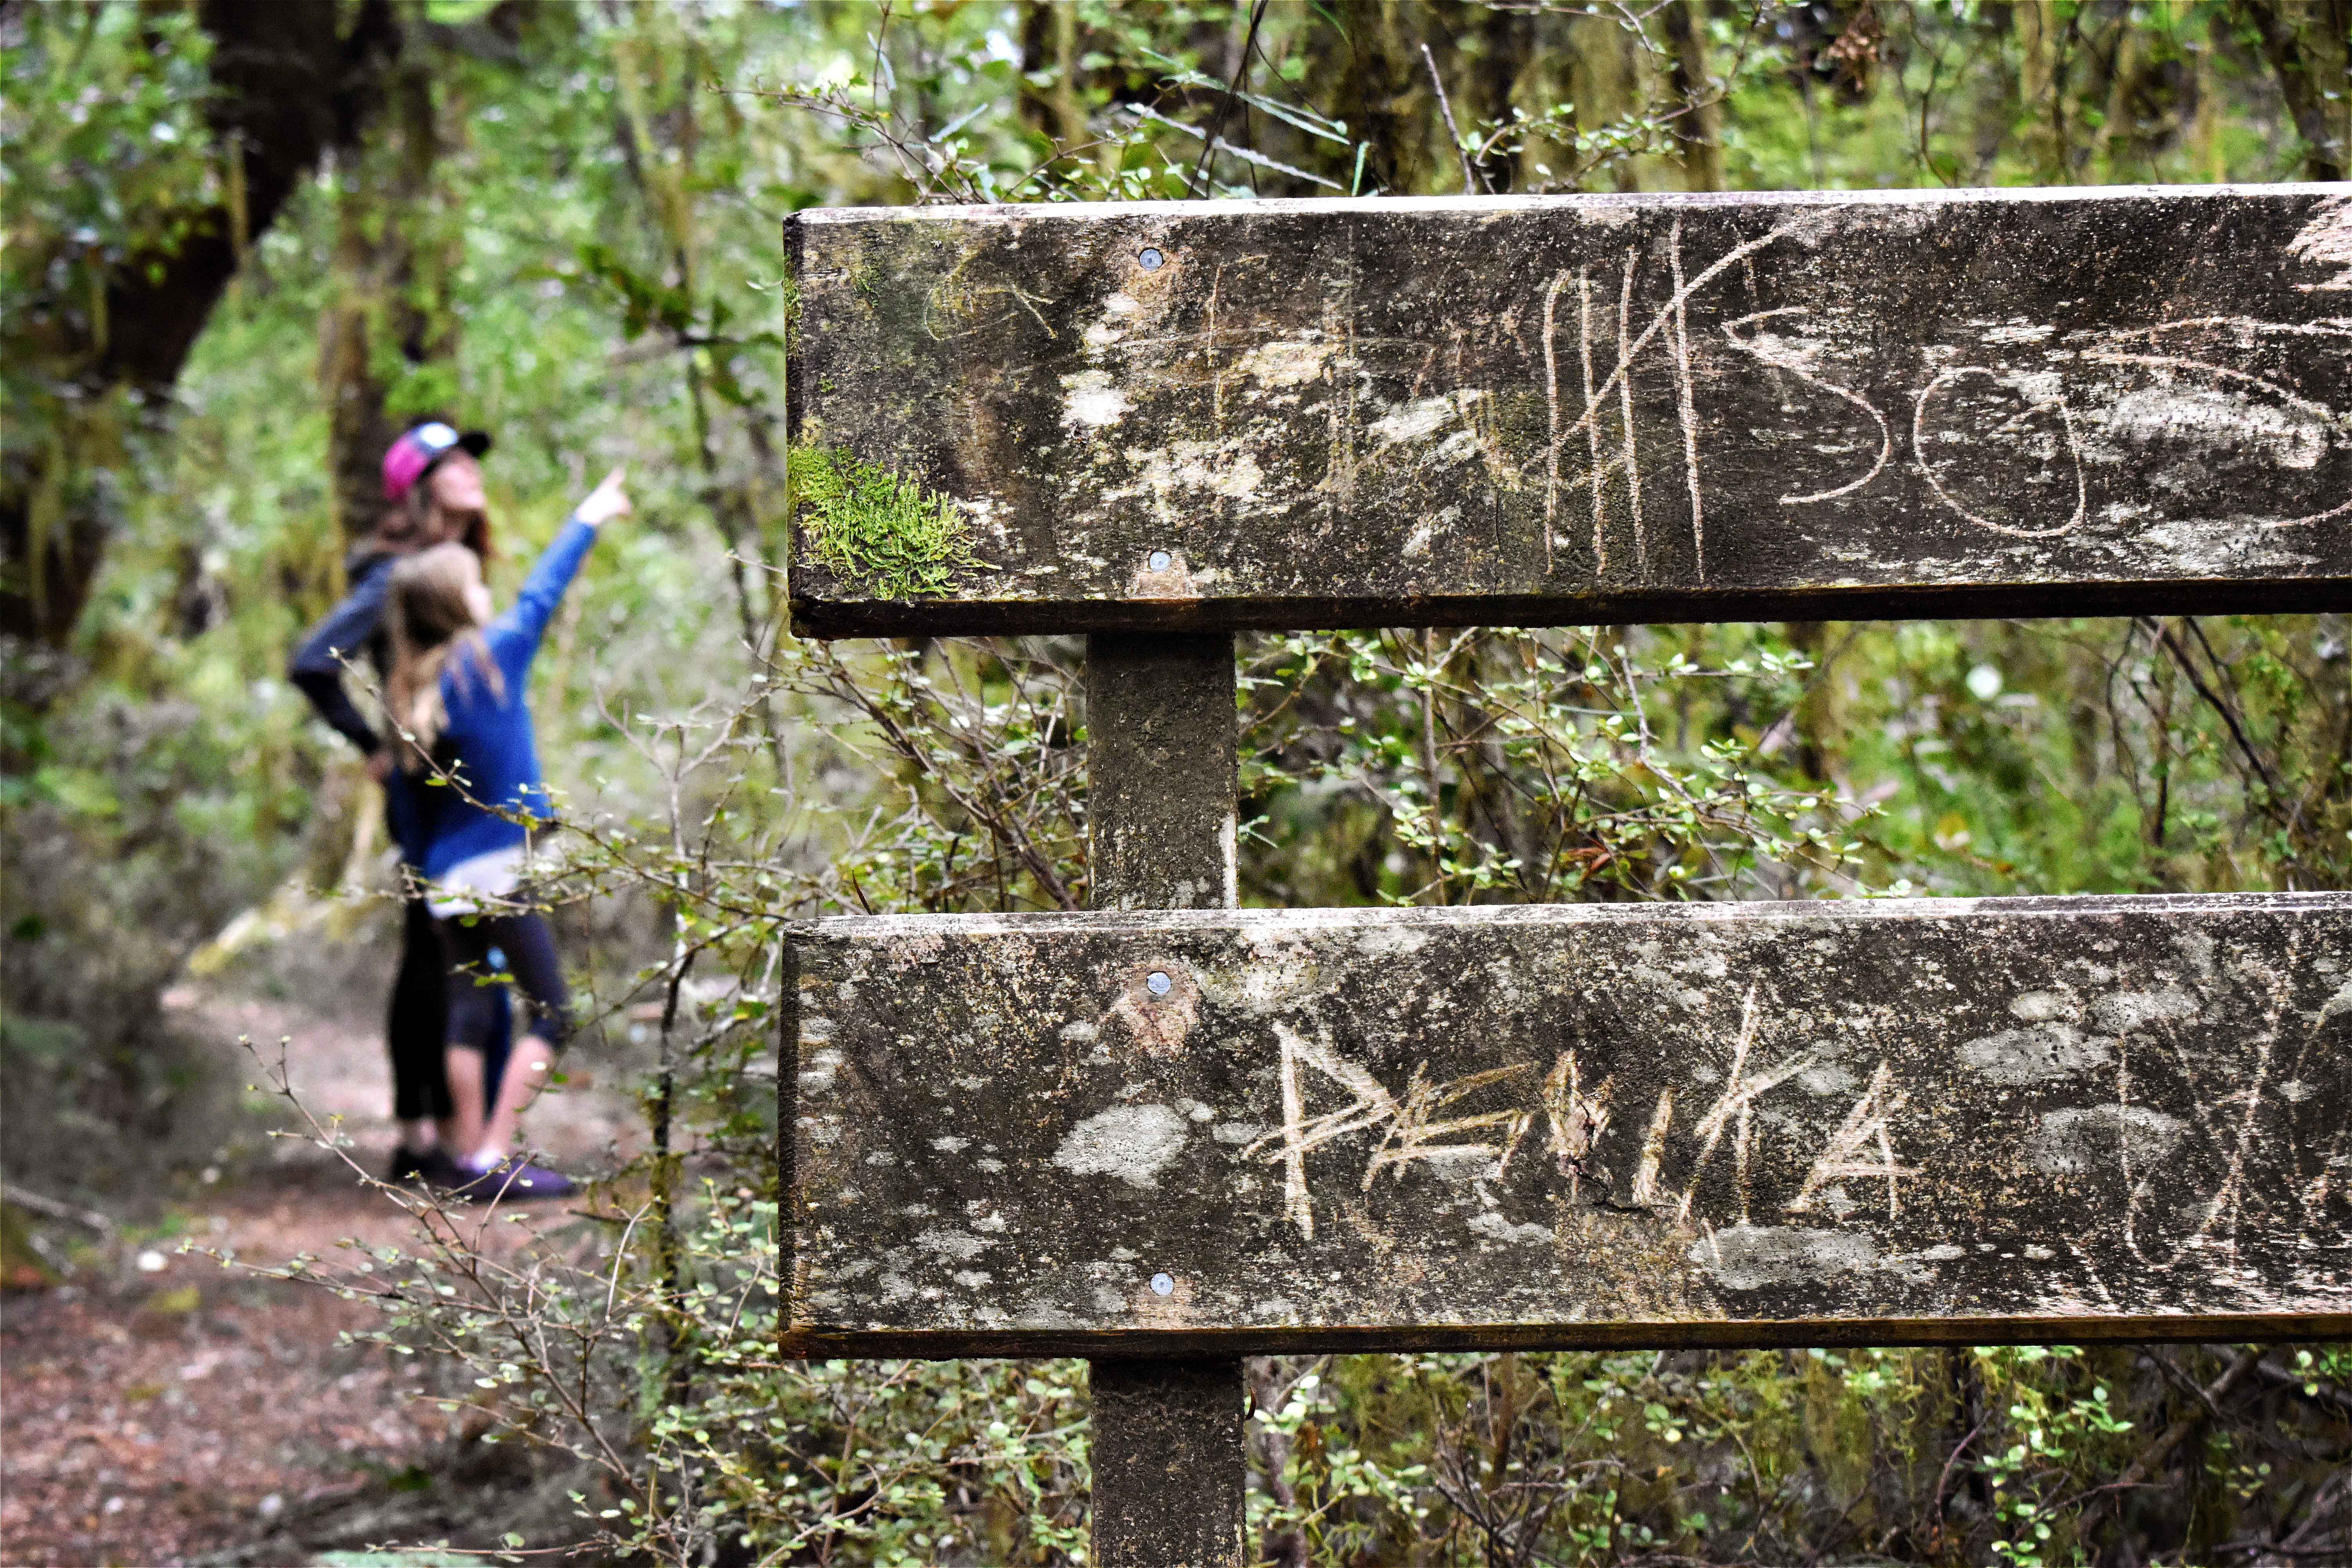 A family looks at native New Zealand bush on a trek around Makarora West's nature trails